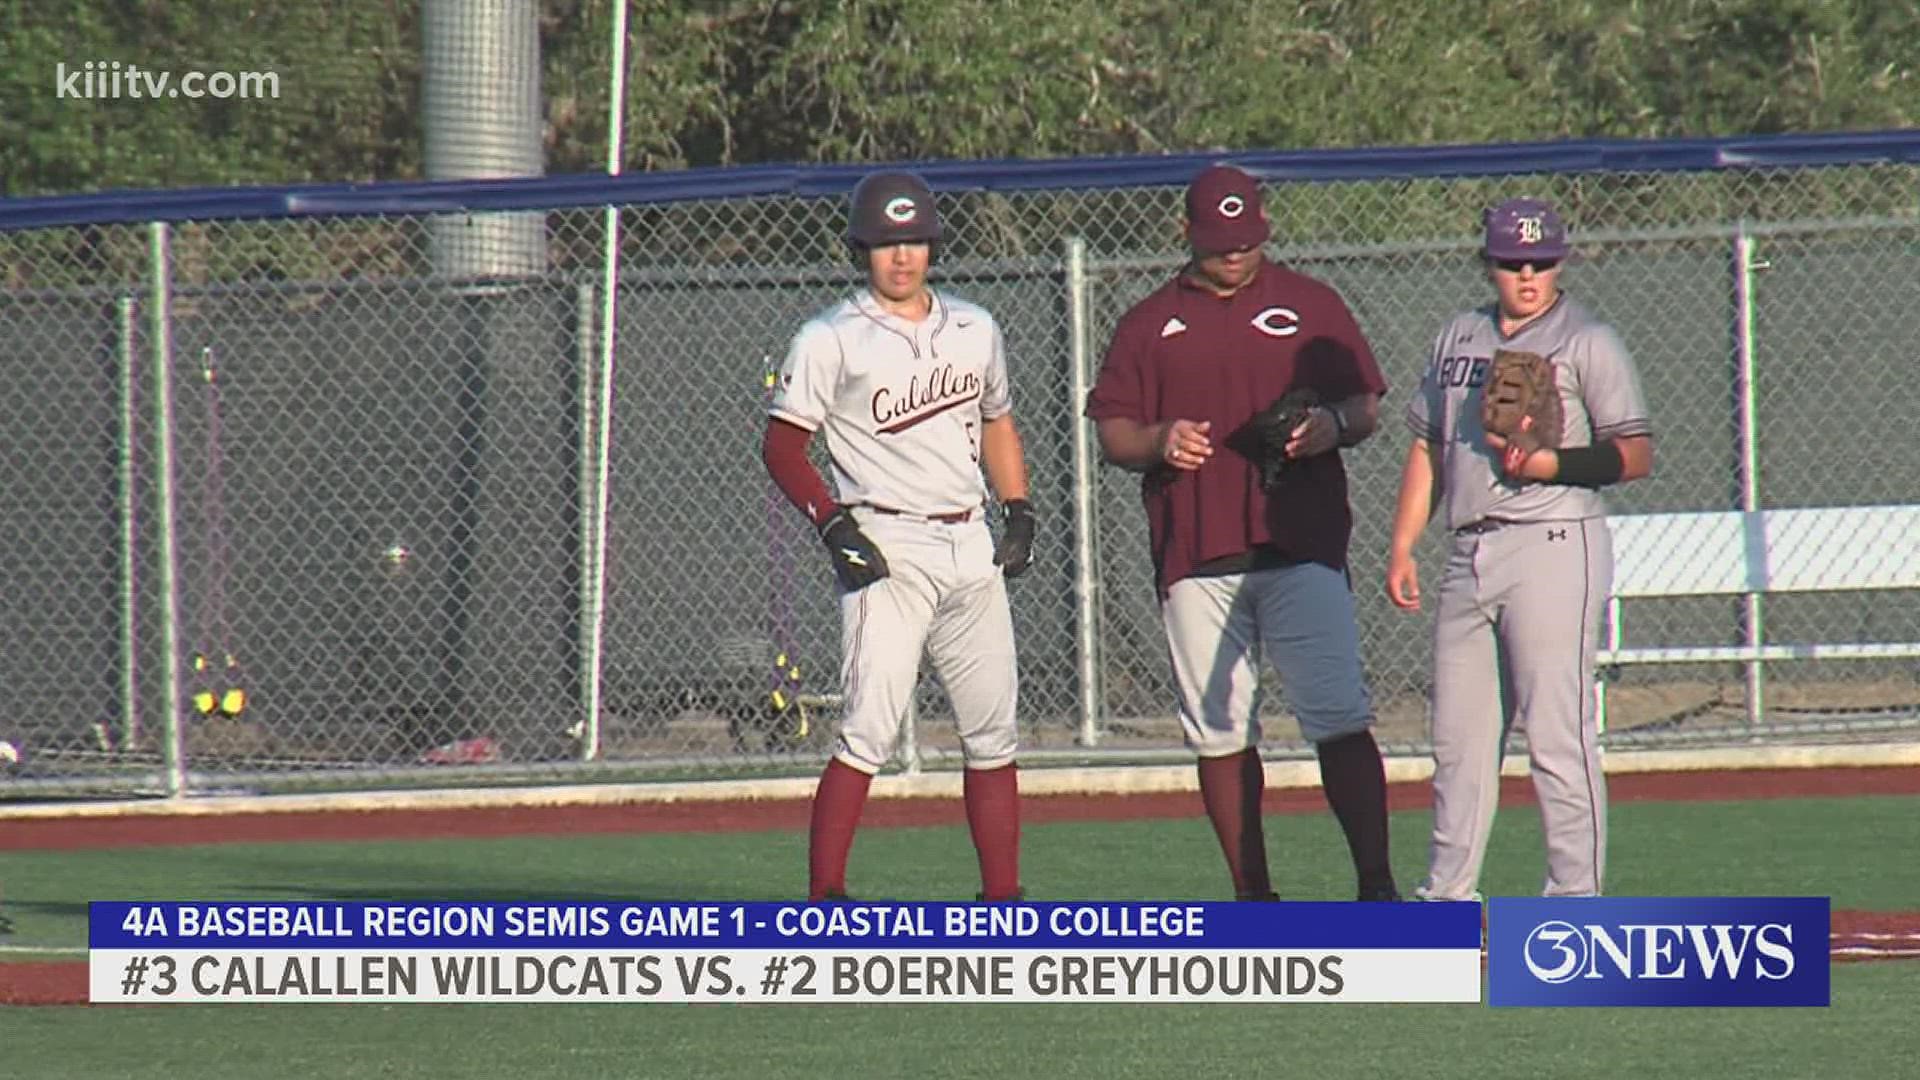 Calallen rallies against #2 Boerne, 12-6; Ray falls to Georgetown, 4-2.